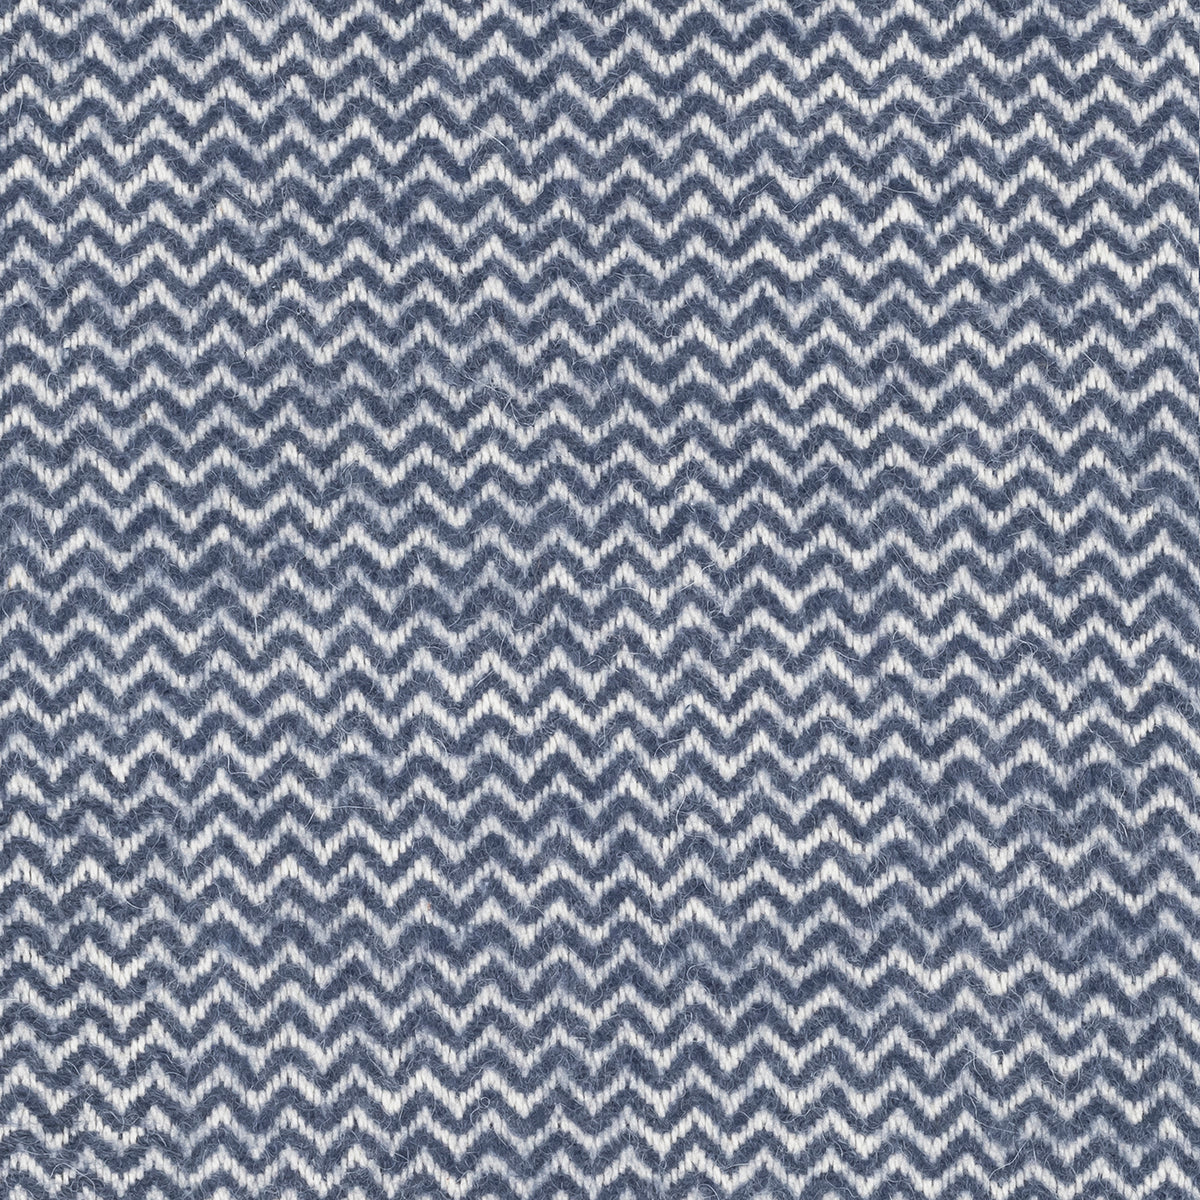 Square cut fabric of Folded Matouk Rhodes Throws Dusty Prussian Blue colored